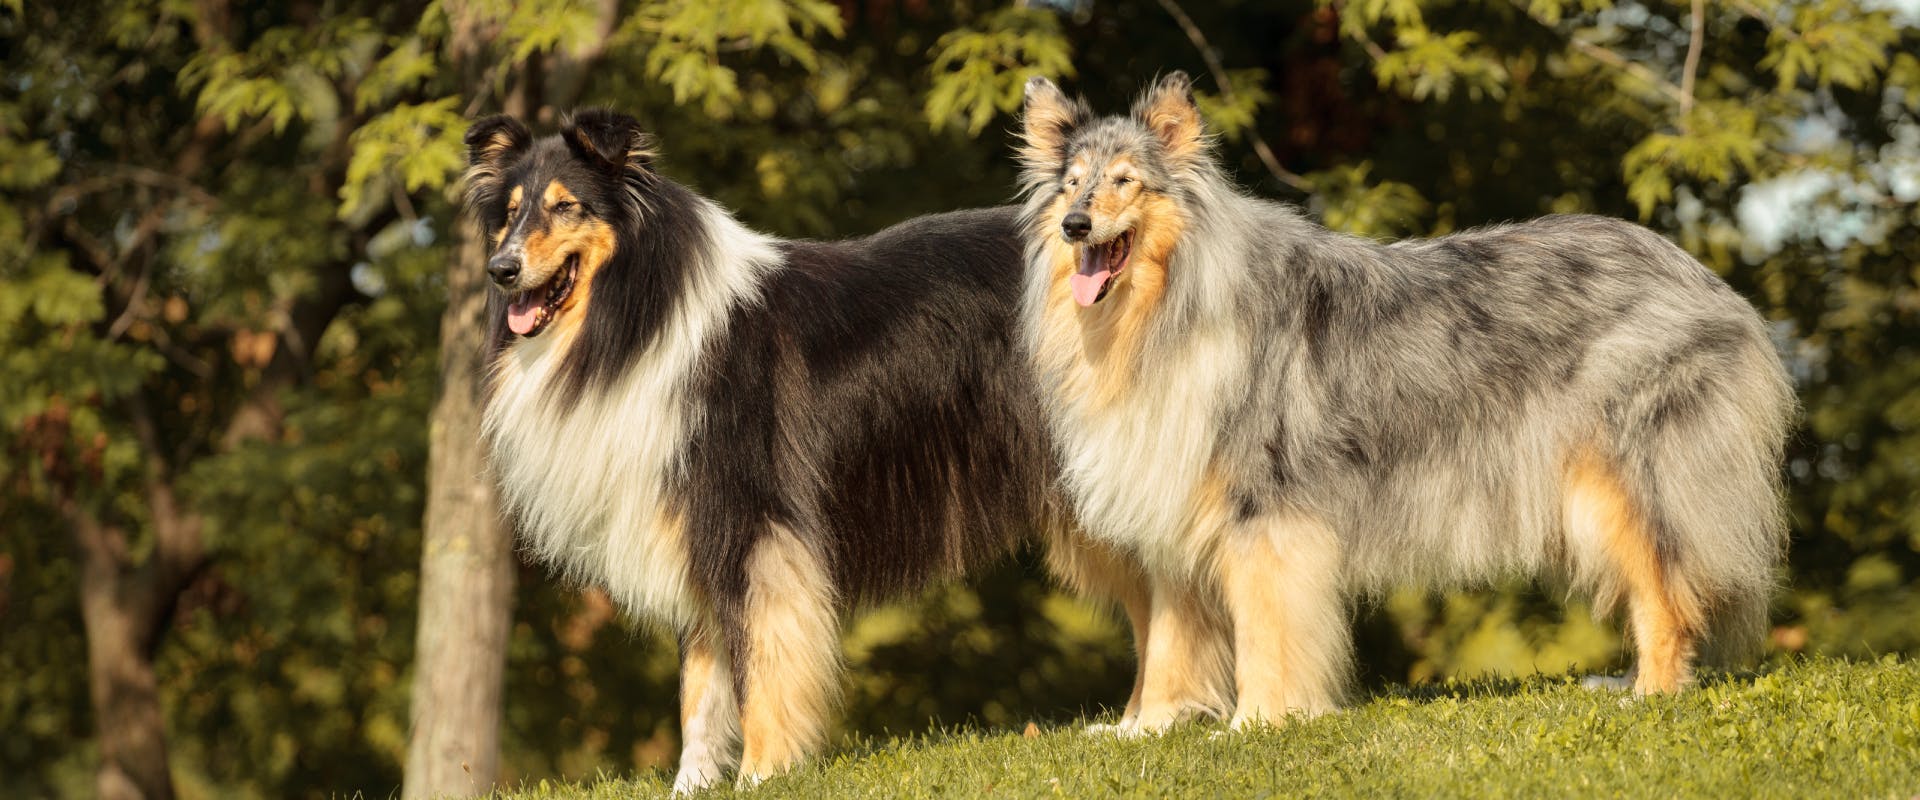 two rough collie dogs, one with a tri-colored coat and another with a blue merle coat, stood on a hill in a park